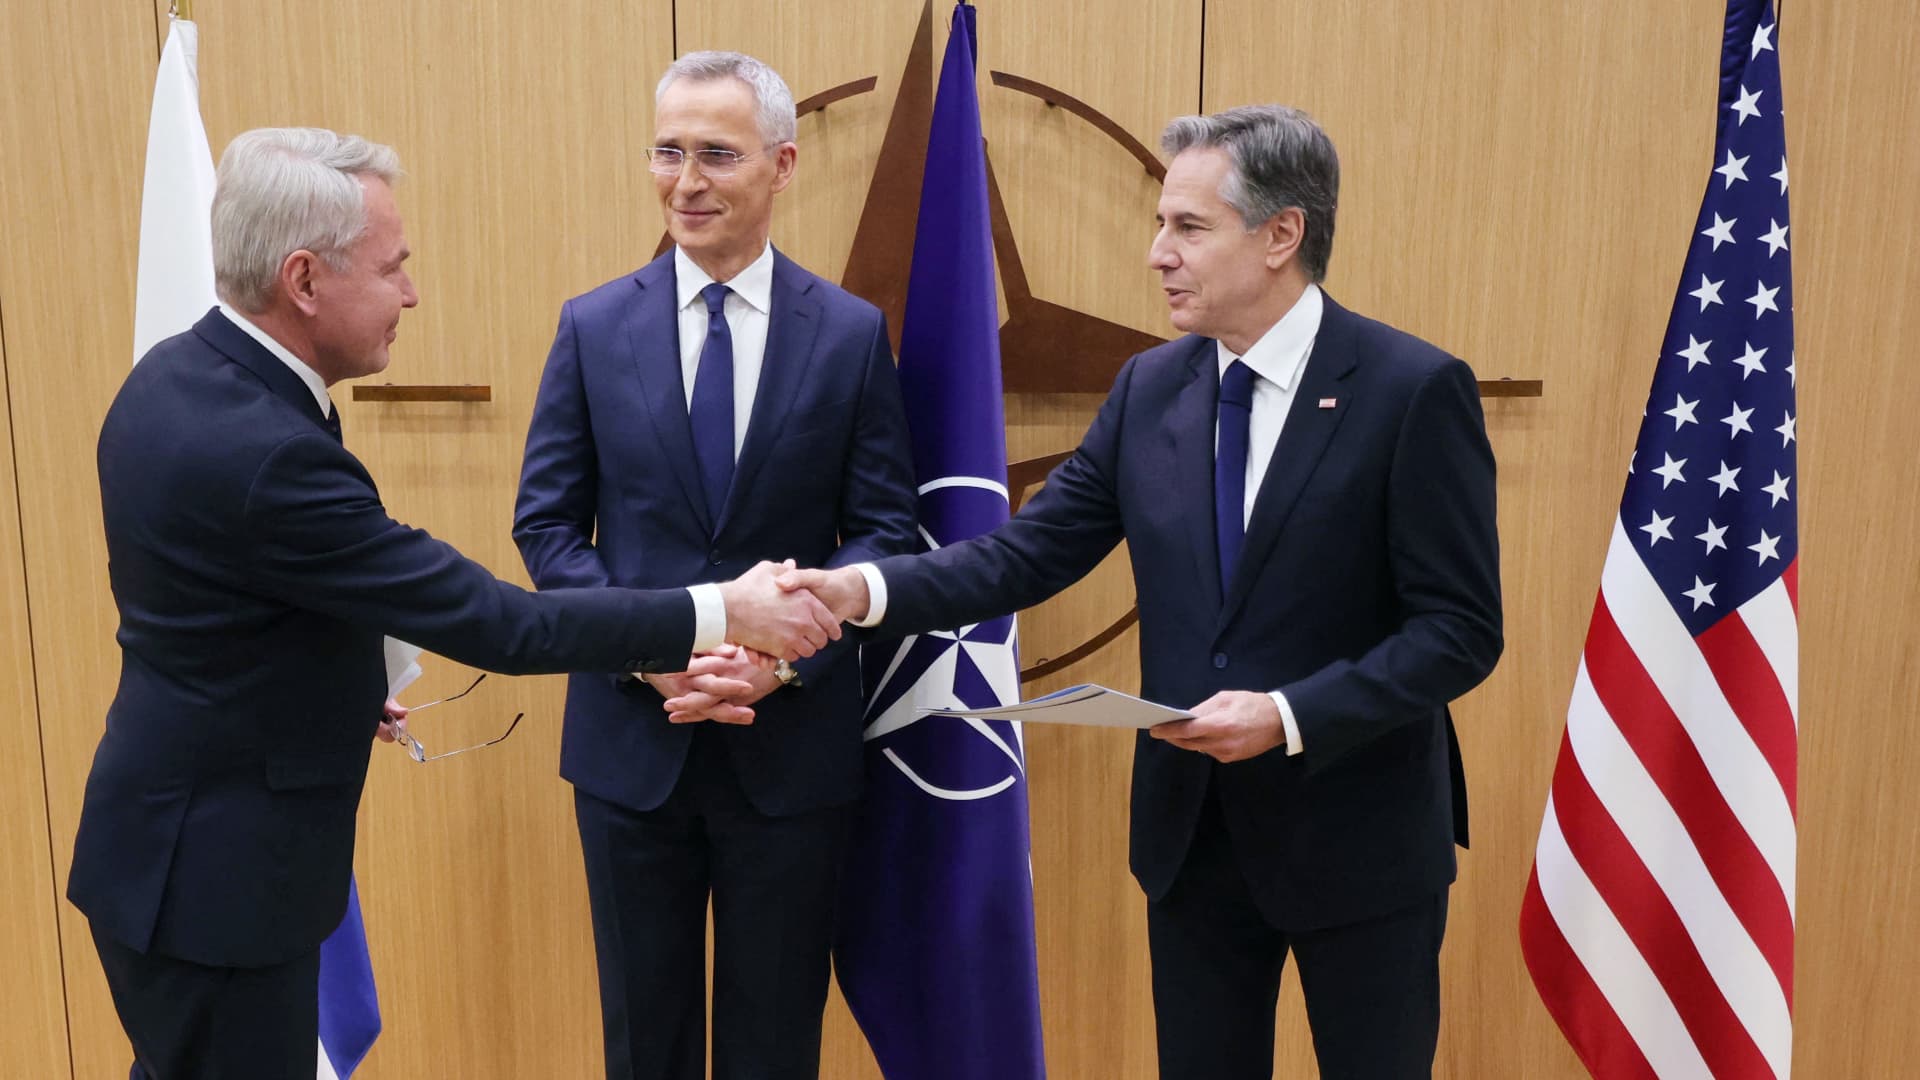 Finnish Foreign Affairs Minister Pekka Haavisto (L) shakes hands with US Secretary of State Antony Blinken, flanked by NATO Secretary-General Jens Stoltenberg (C) as he hands over Finland's accession to NATO documents, during a joining ceremony at a NATO - North Atlantic Council (NAC) Foreign Affairs ministers' meeting, at the NATO headquarters in Brussels, on April 4, 2023. - Finland on April 4 became the 31st member of NATO, wrapping up its historic strategic shift with the deposit of its accession documents to the alliance. 